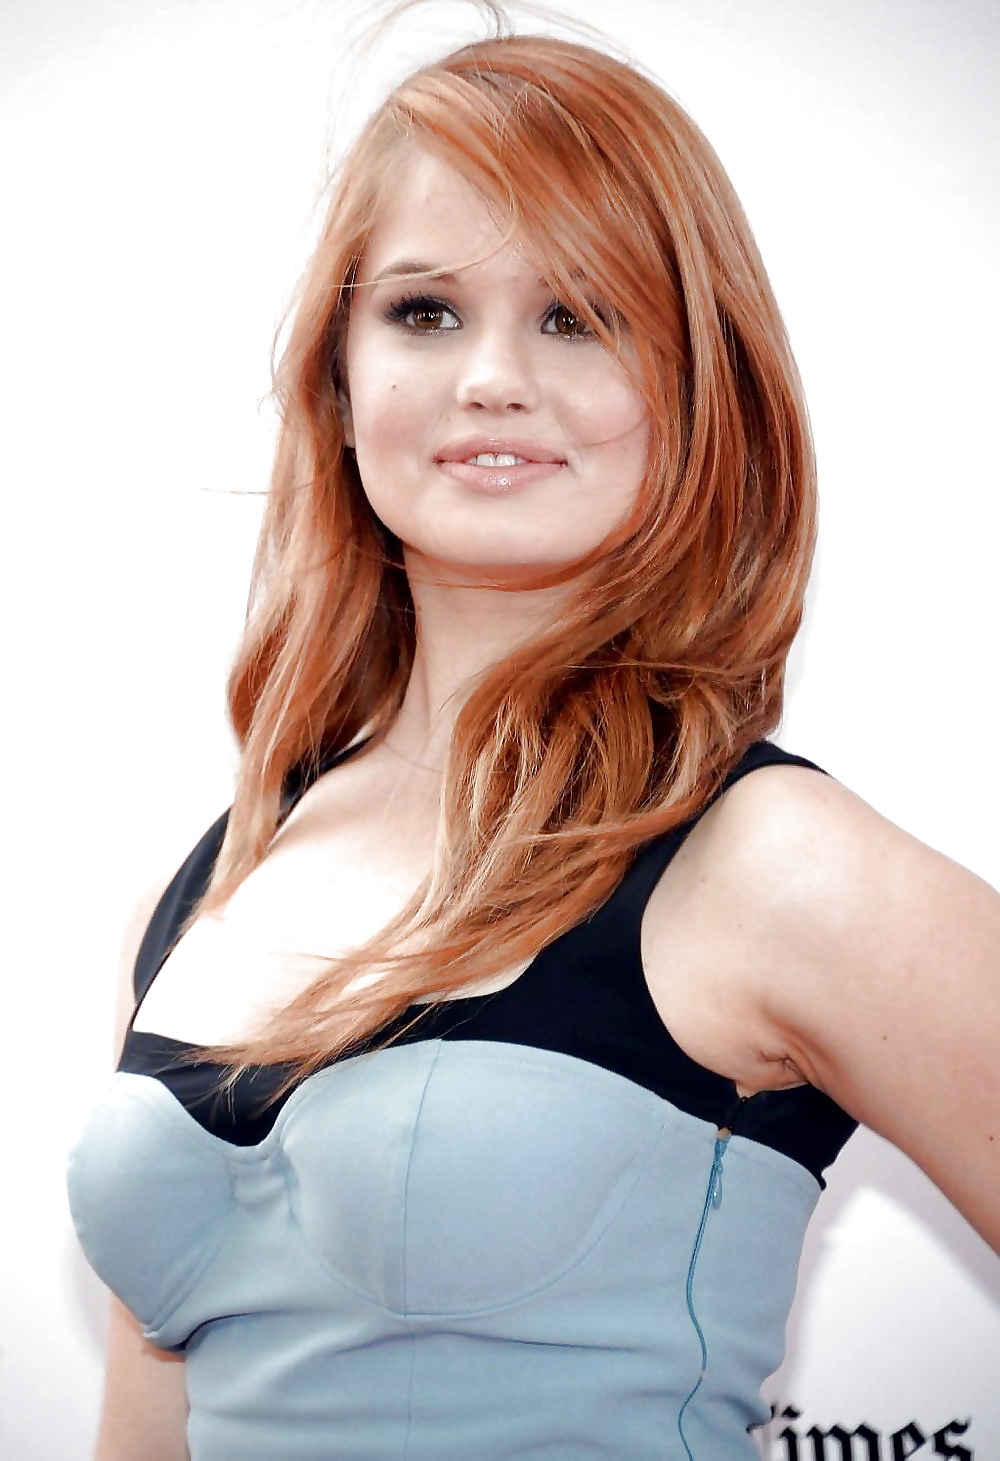 Cum for sexy star DEBBY RYAN and comment #31757351